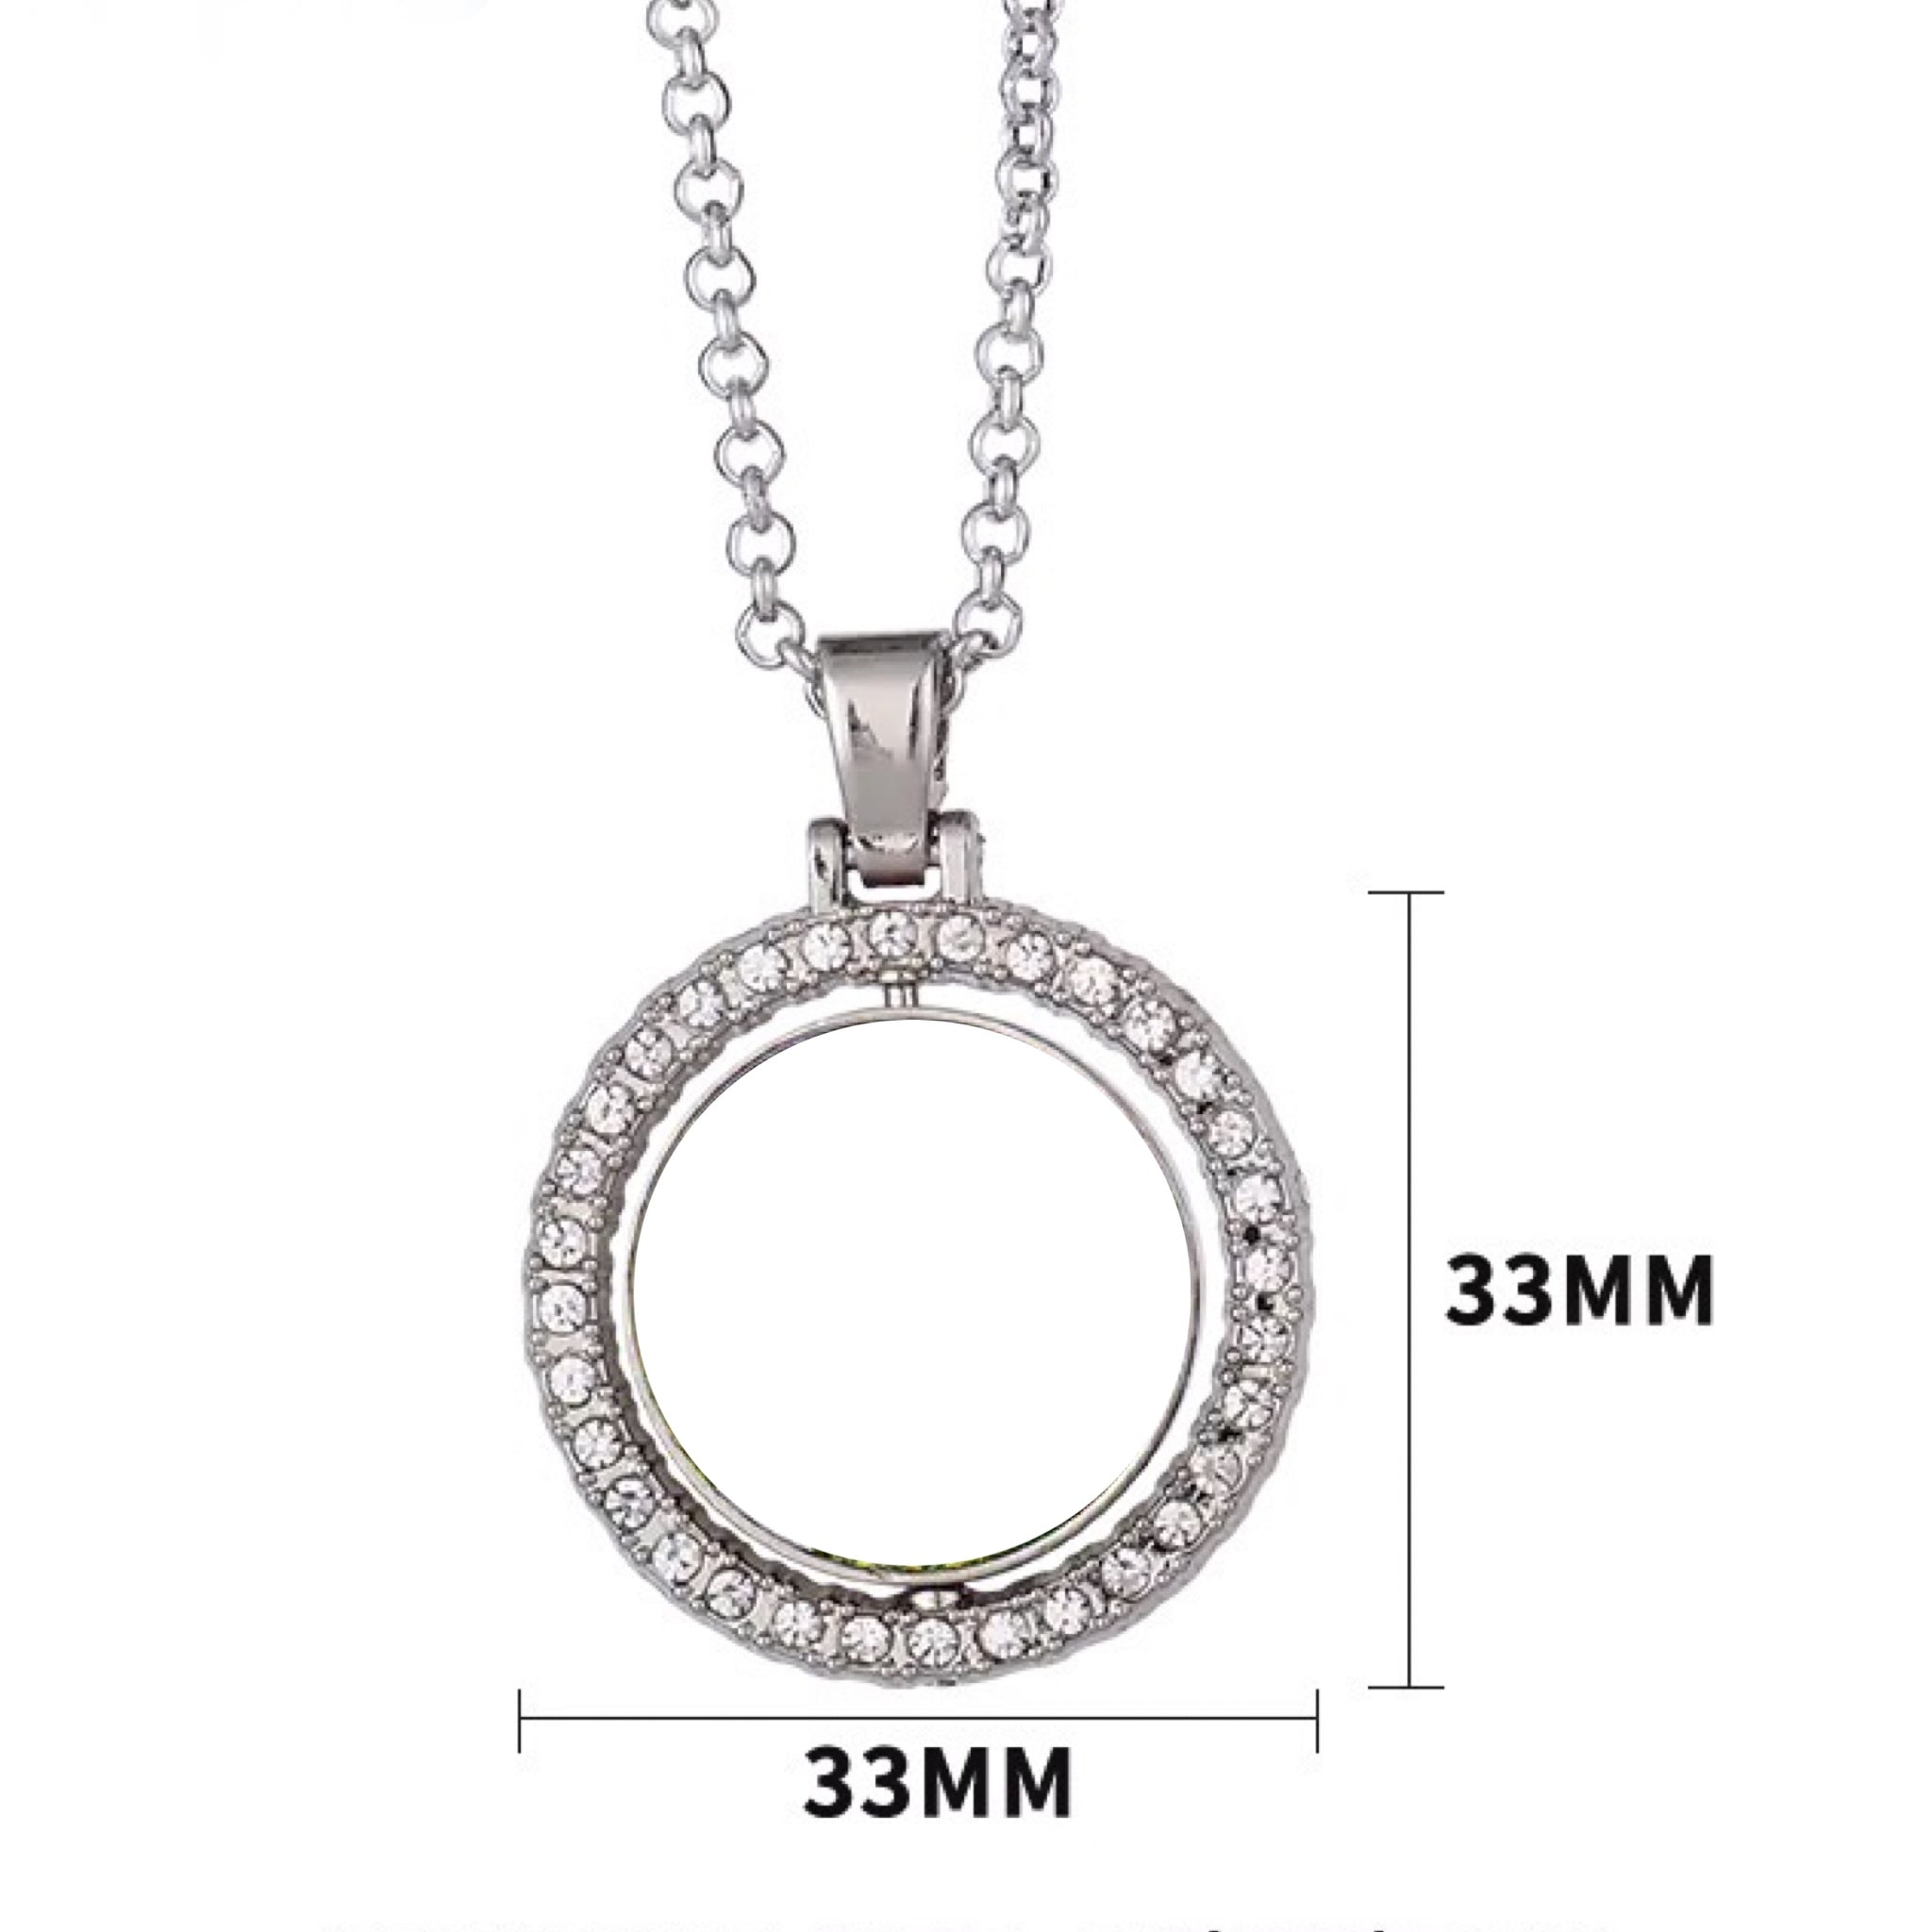 Sublimation 25mm Circle Jewelry Gold Colored w/Chain, Includes Insert